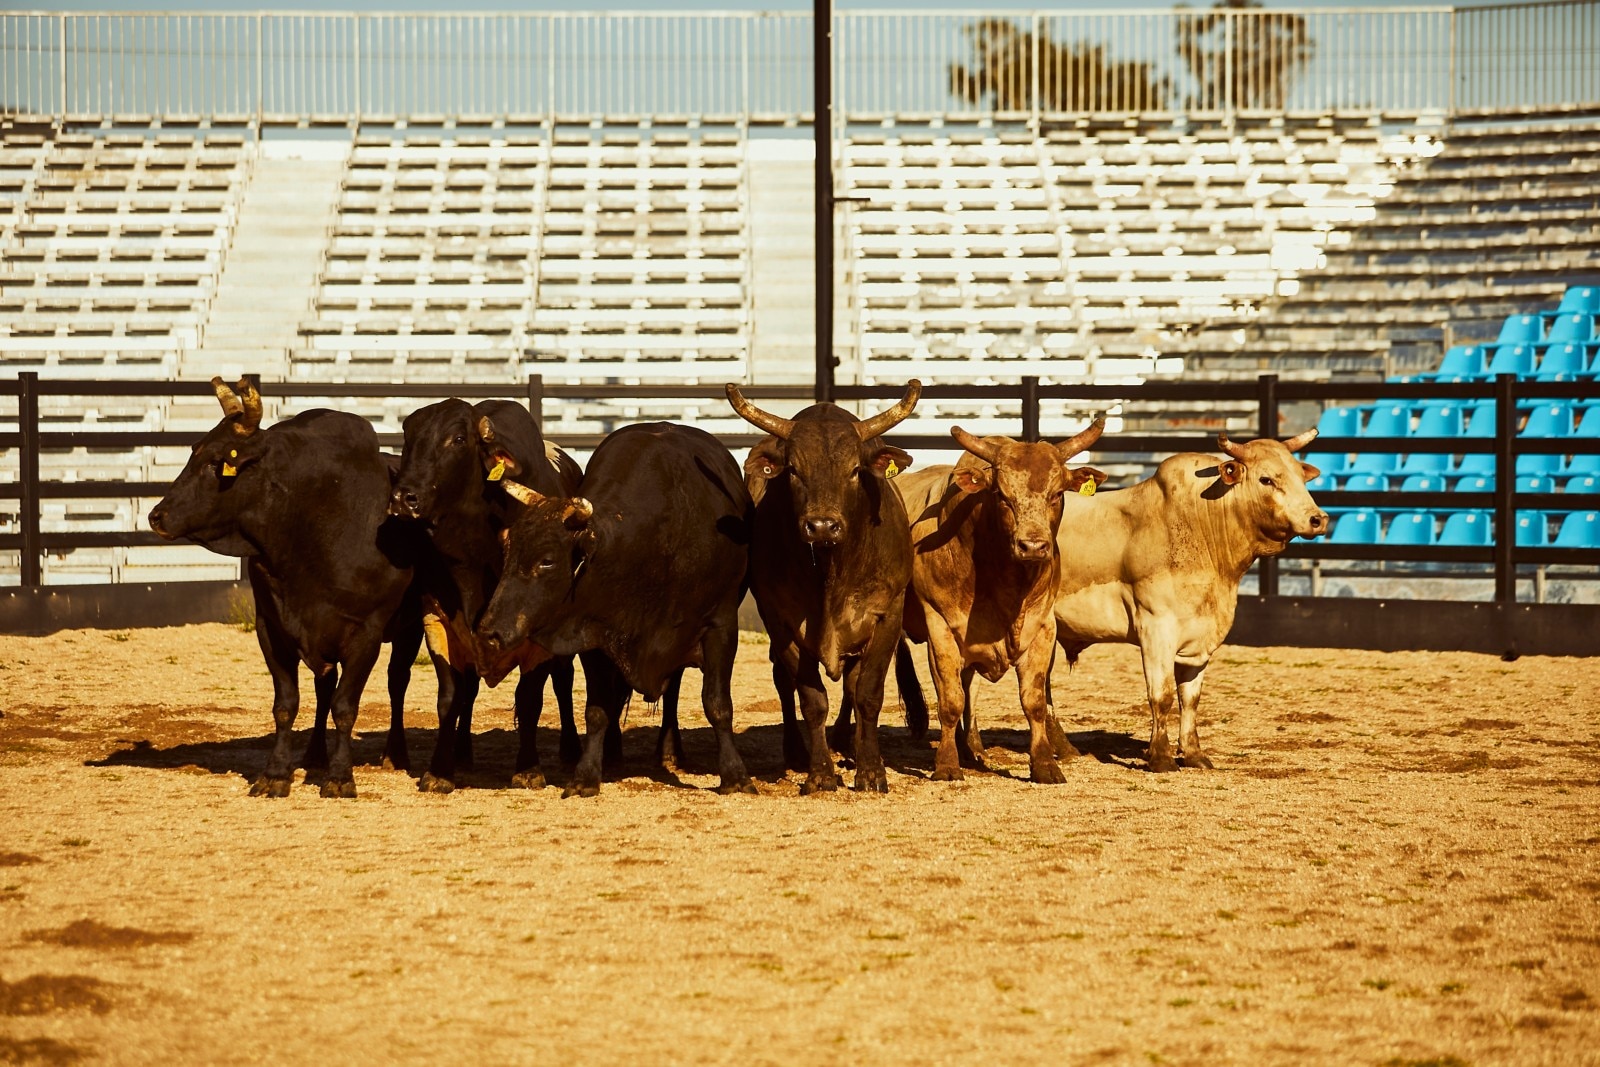 6 bulls standing next to one another in a competition ring with spectator stands in the background.